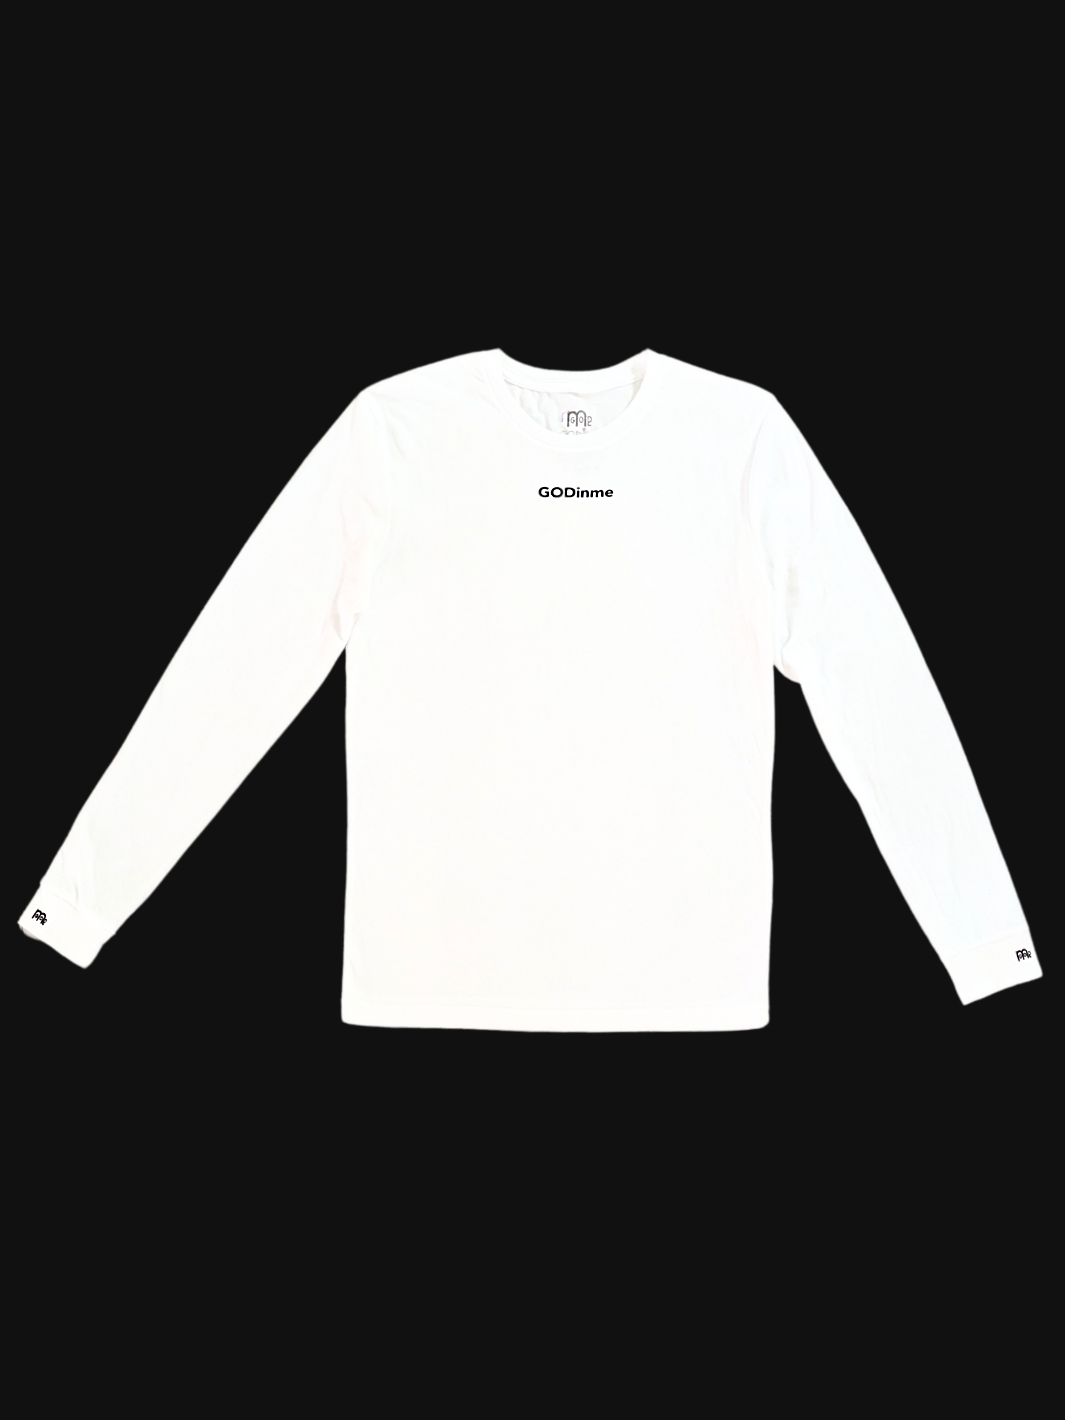 Made to feel like sueded peach fuzz, this White long sleeve shirt offers unbeatable comfort. The GODinme printed on front chest and the logo on sleeve cuffs and upper back represent boldness and style.